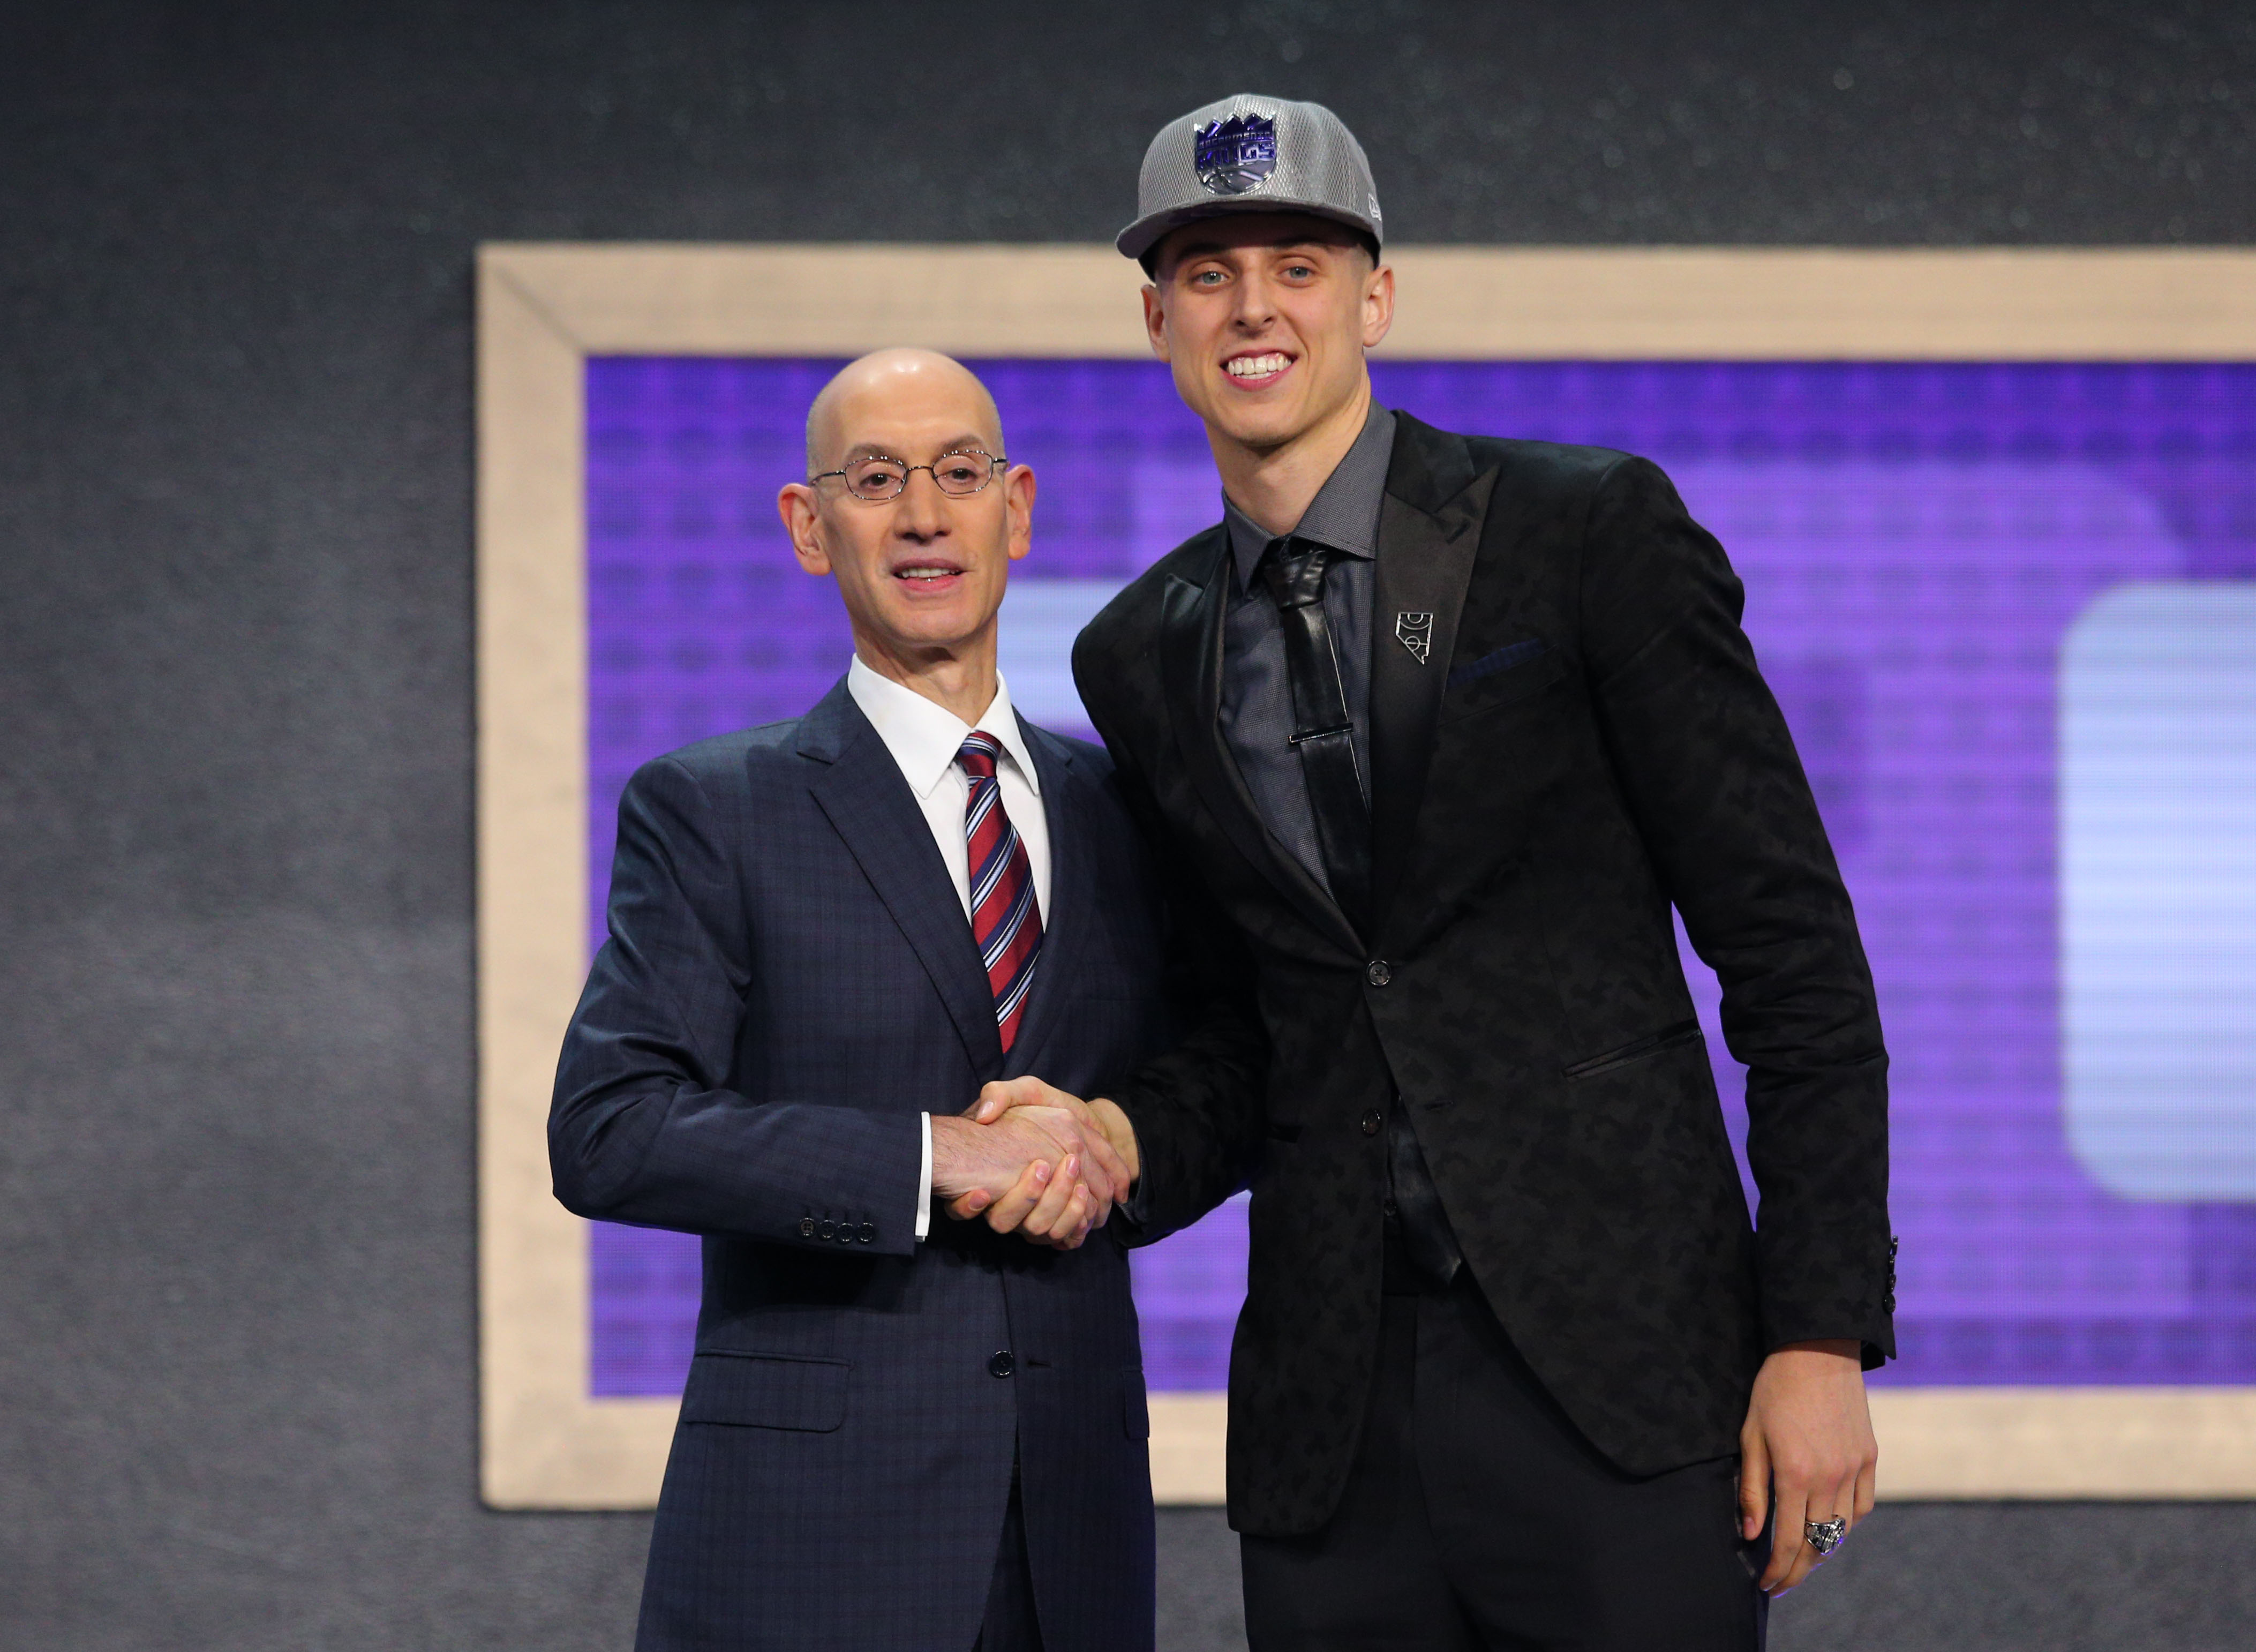 2017 NBA Draft Profile: Zach Collins in the NBA could be something special  - The Slipper Still Fits